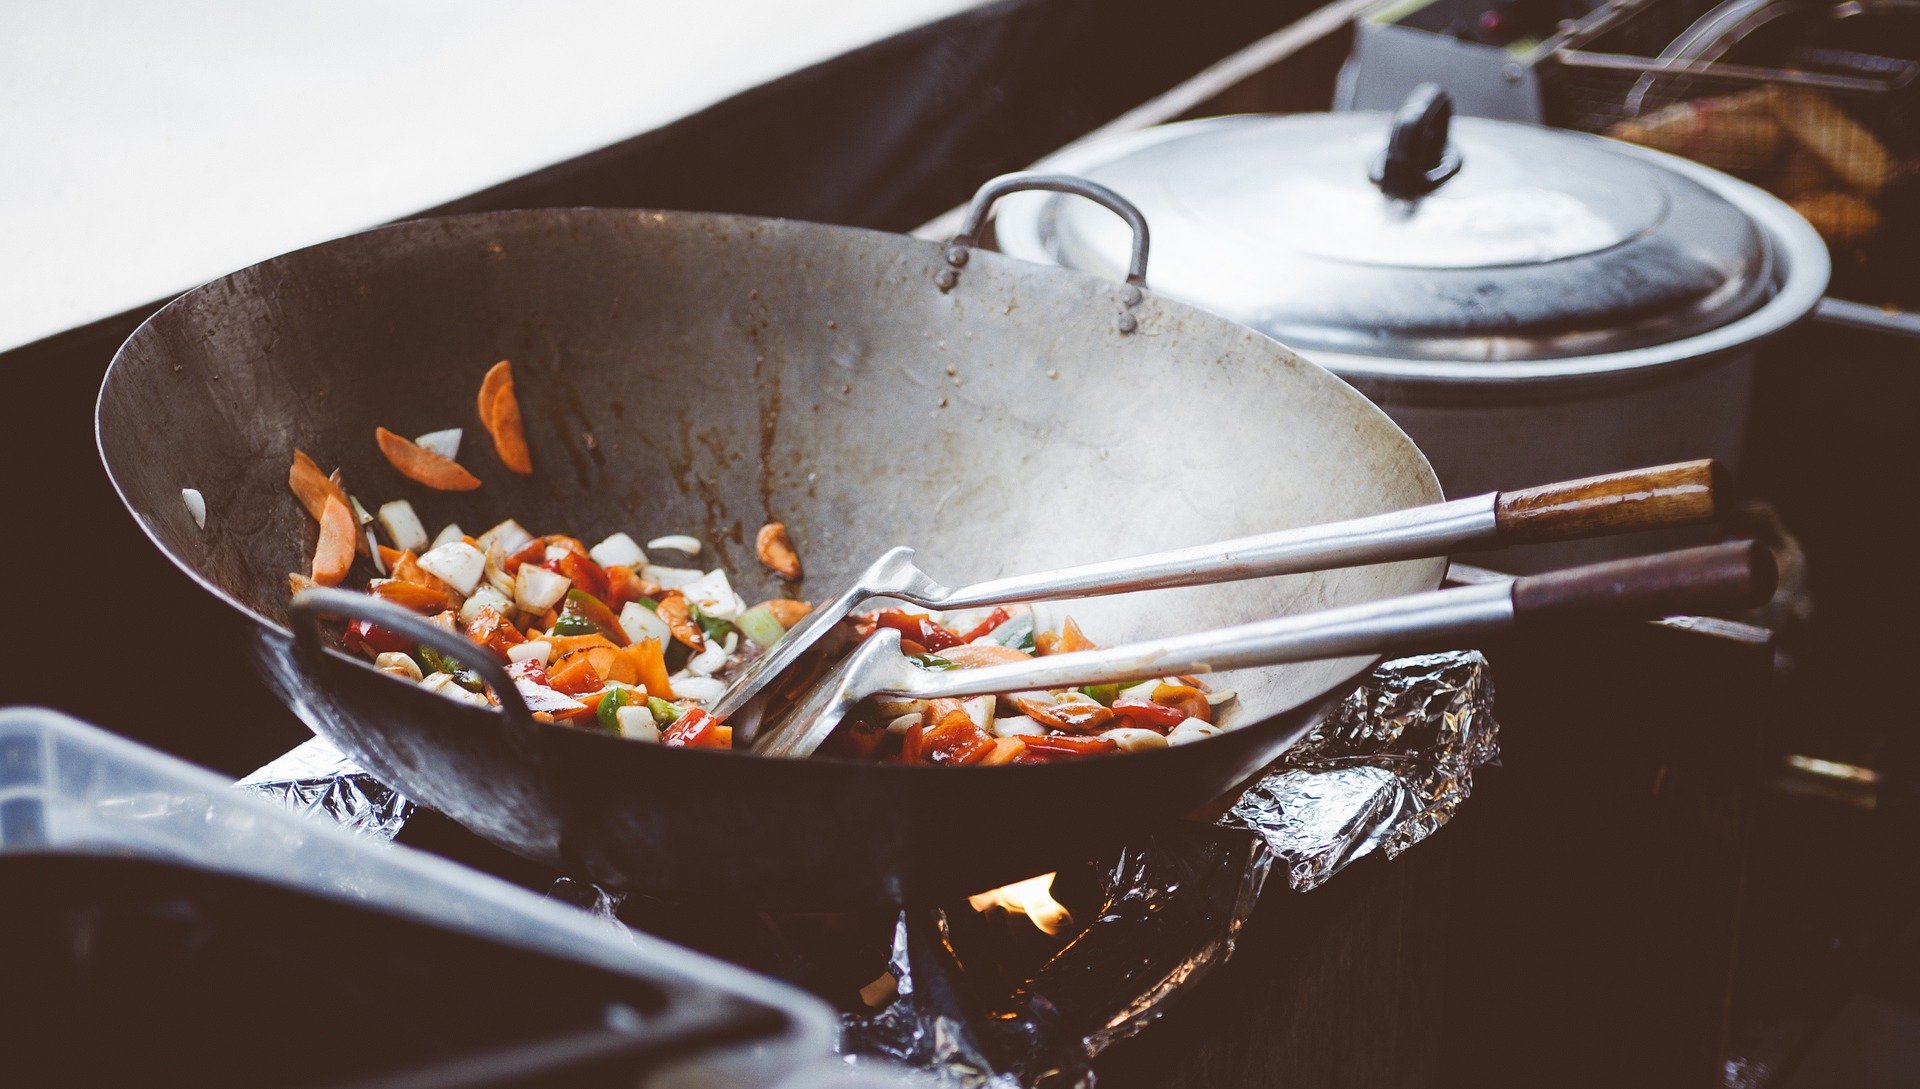 5 Easy Tips to Help You Save Your Cooking Gas